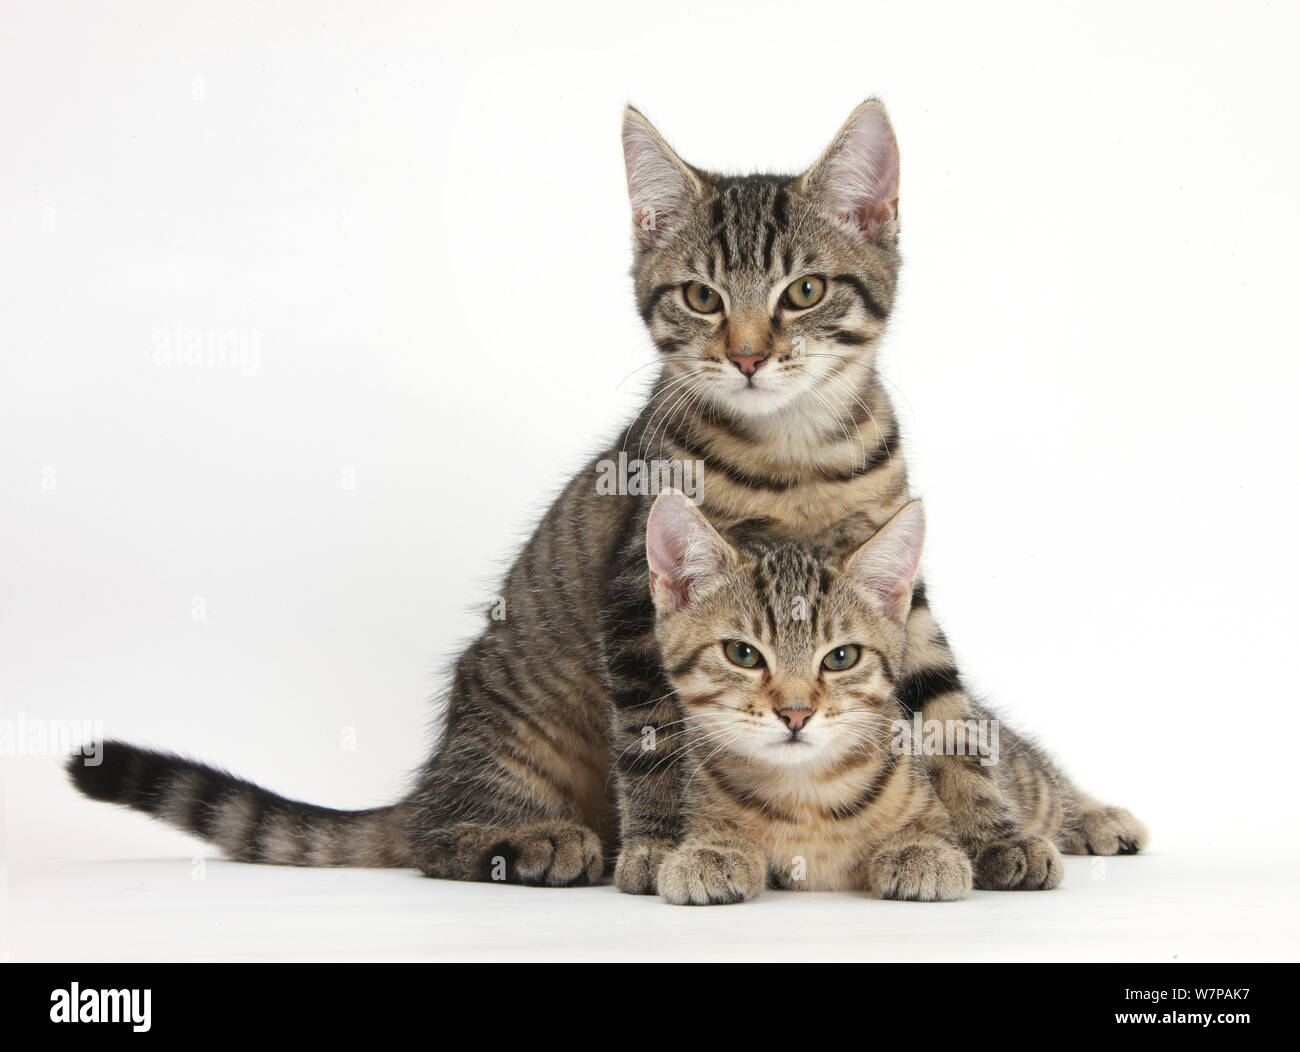 Tabby kittens, Stanley and Fosset, 3 months old, lounging together. Stock Photo